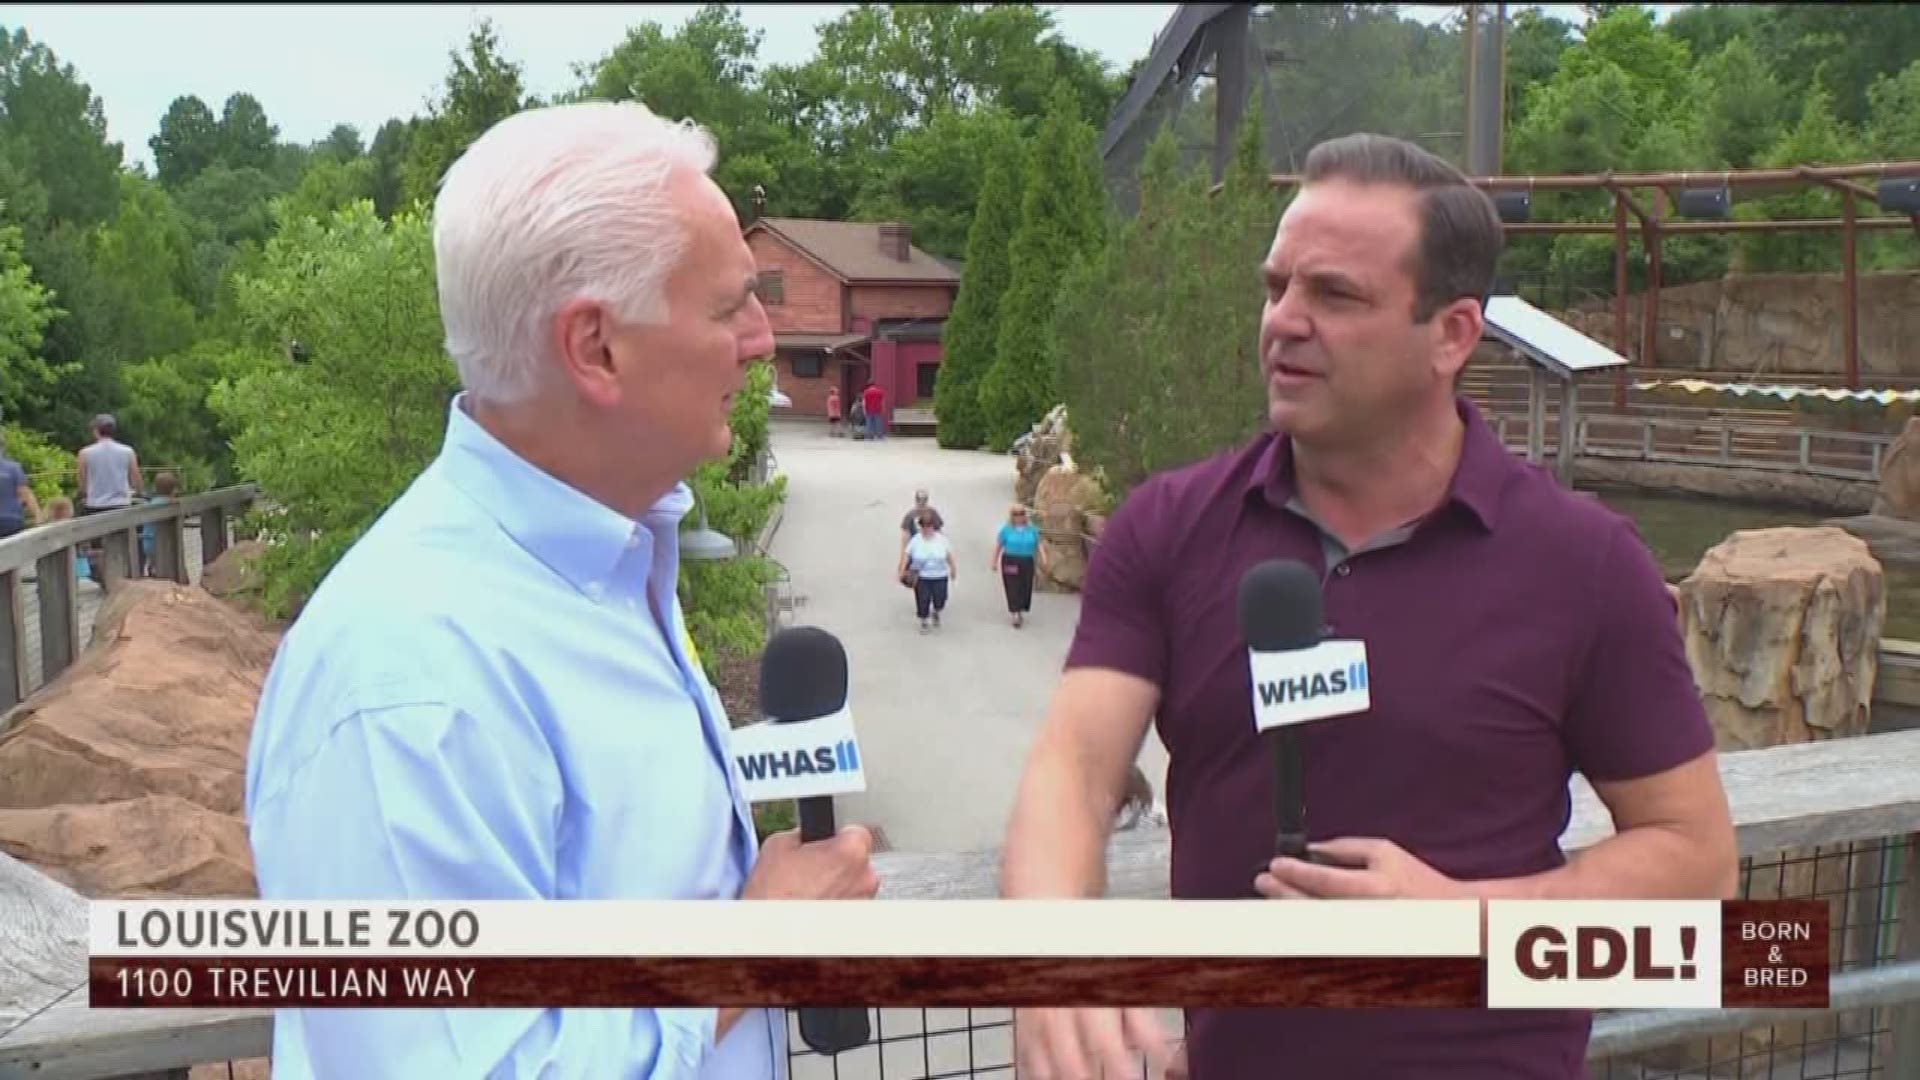 We're celebrating the Louisville Zoo's history and evolution with director John Walzak, who shares some of their greatest watershed moments.